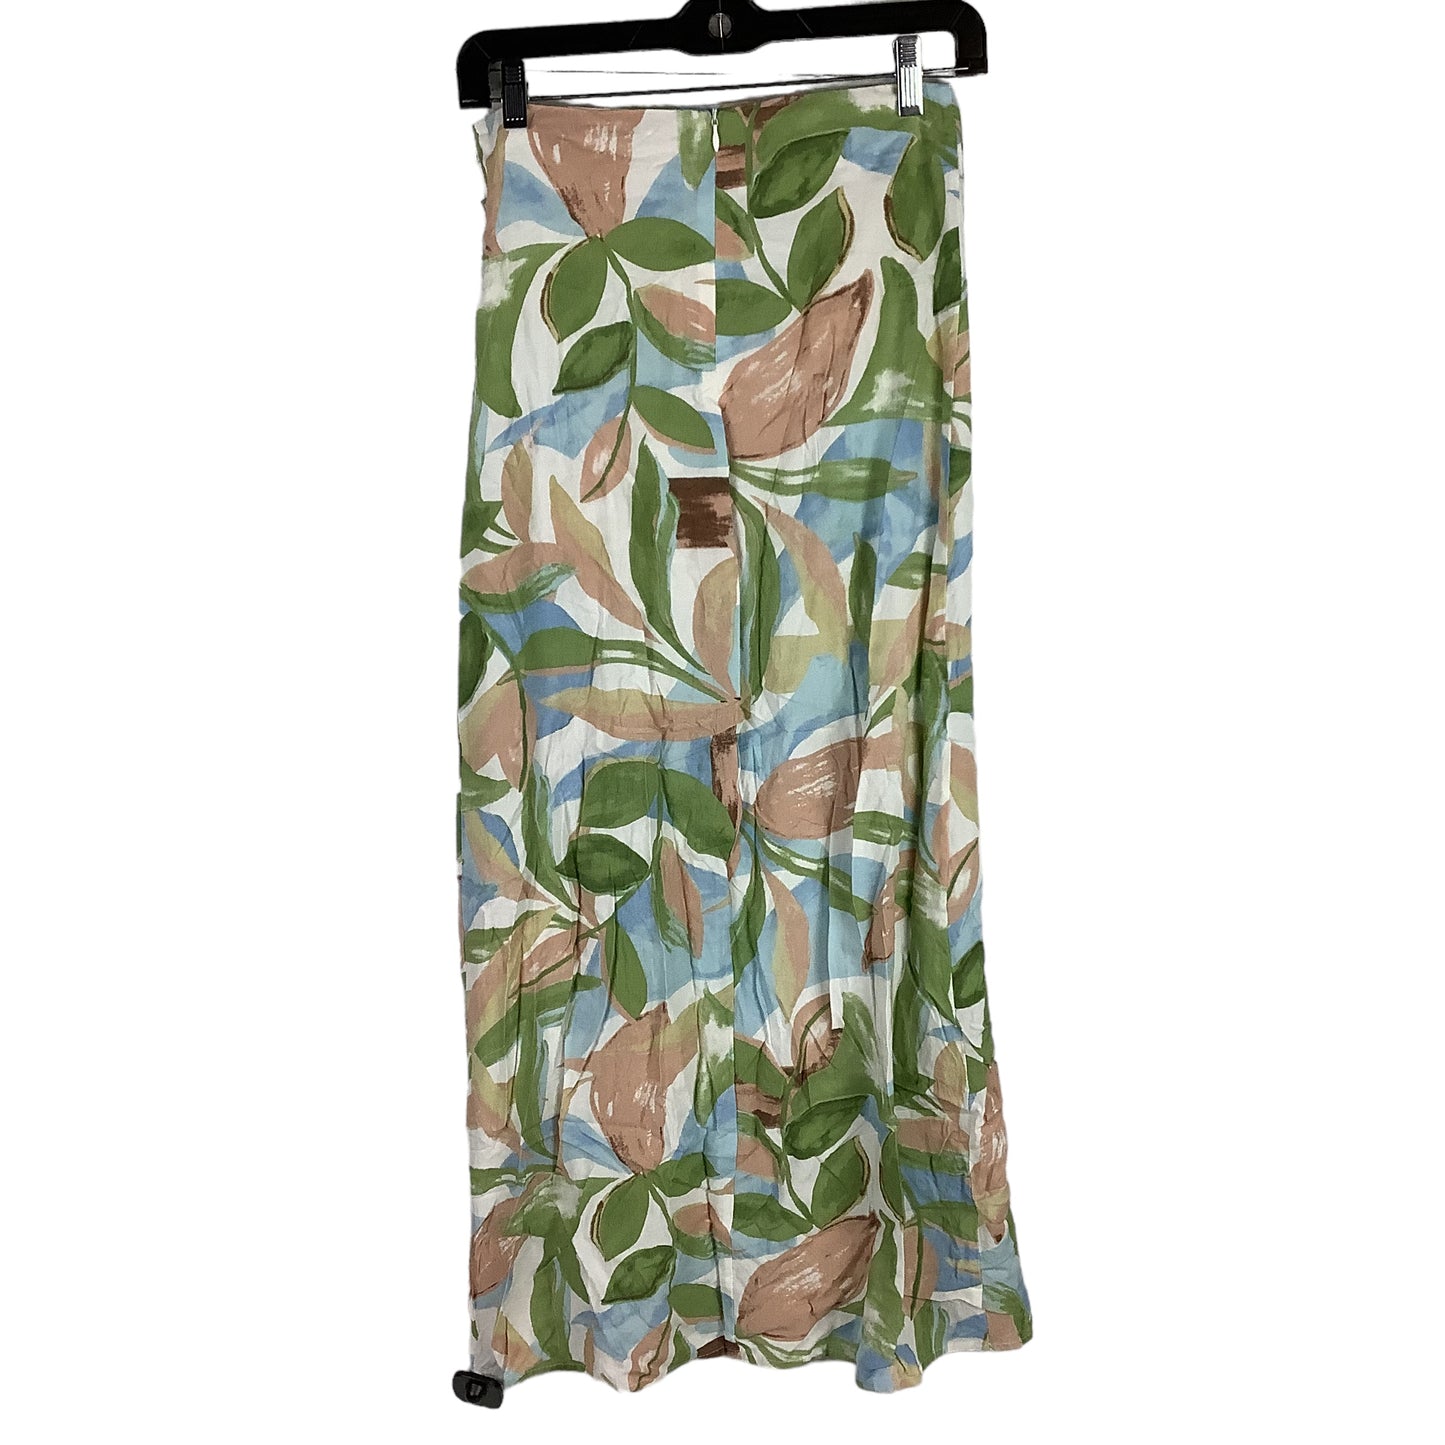 Skirt Maxi By Clothes Mentor  Size: Xs